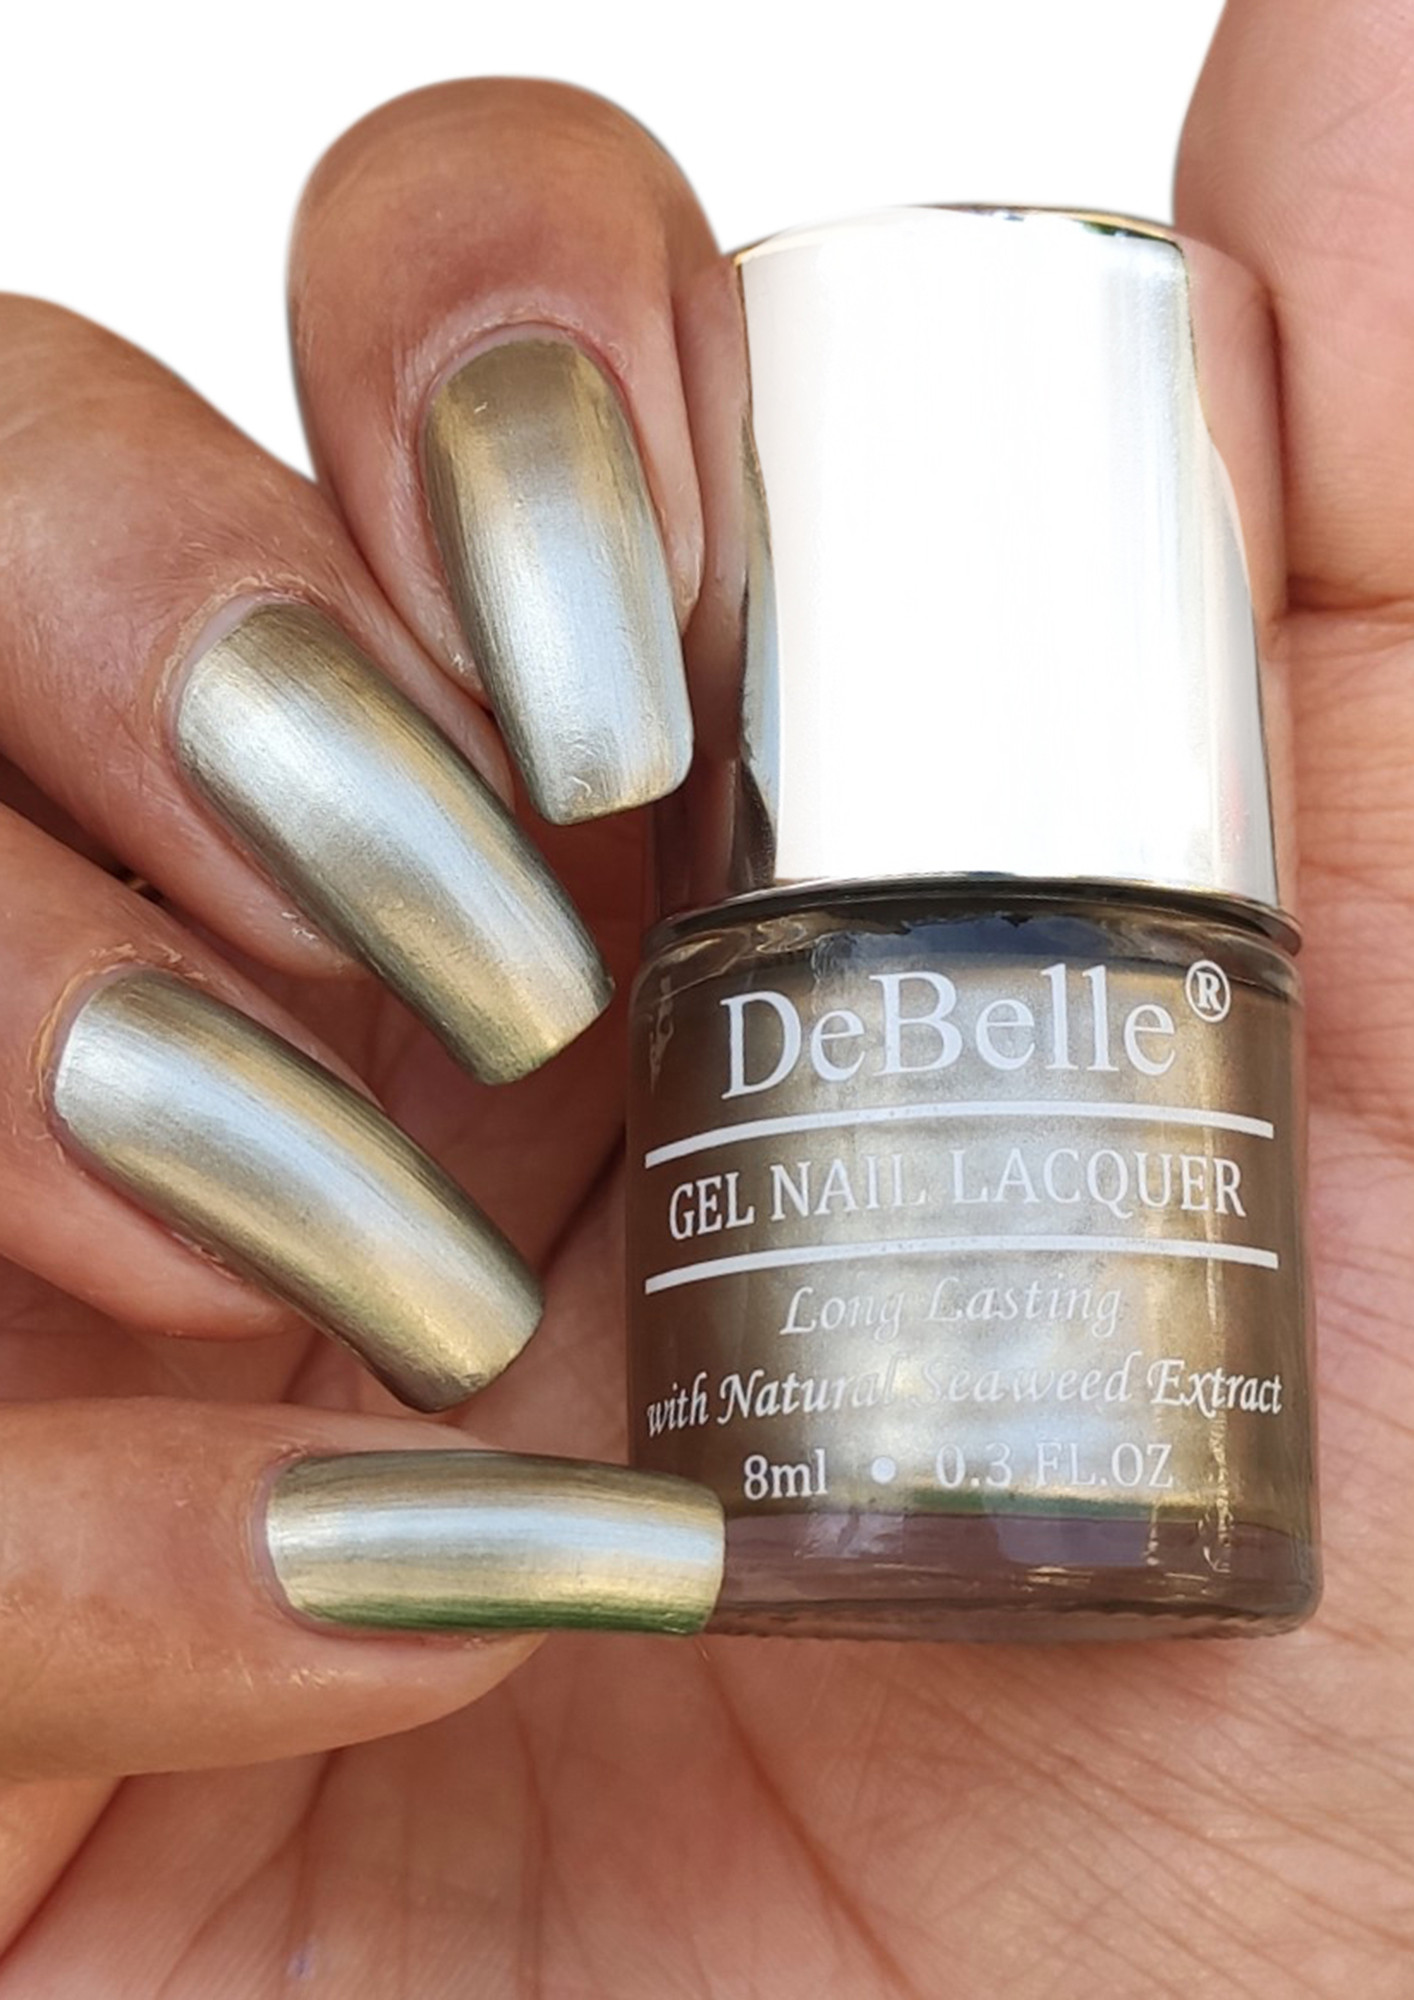 DeBelle Gel Nail Lacquer Rustique Gold Metallic Rust Gold Nail Polish